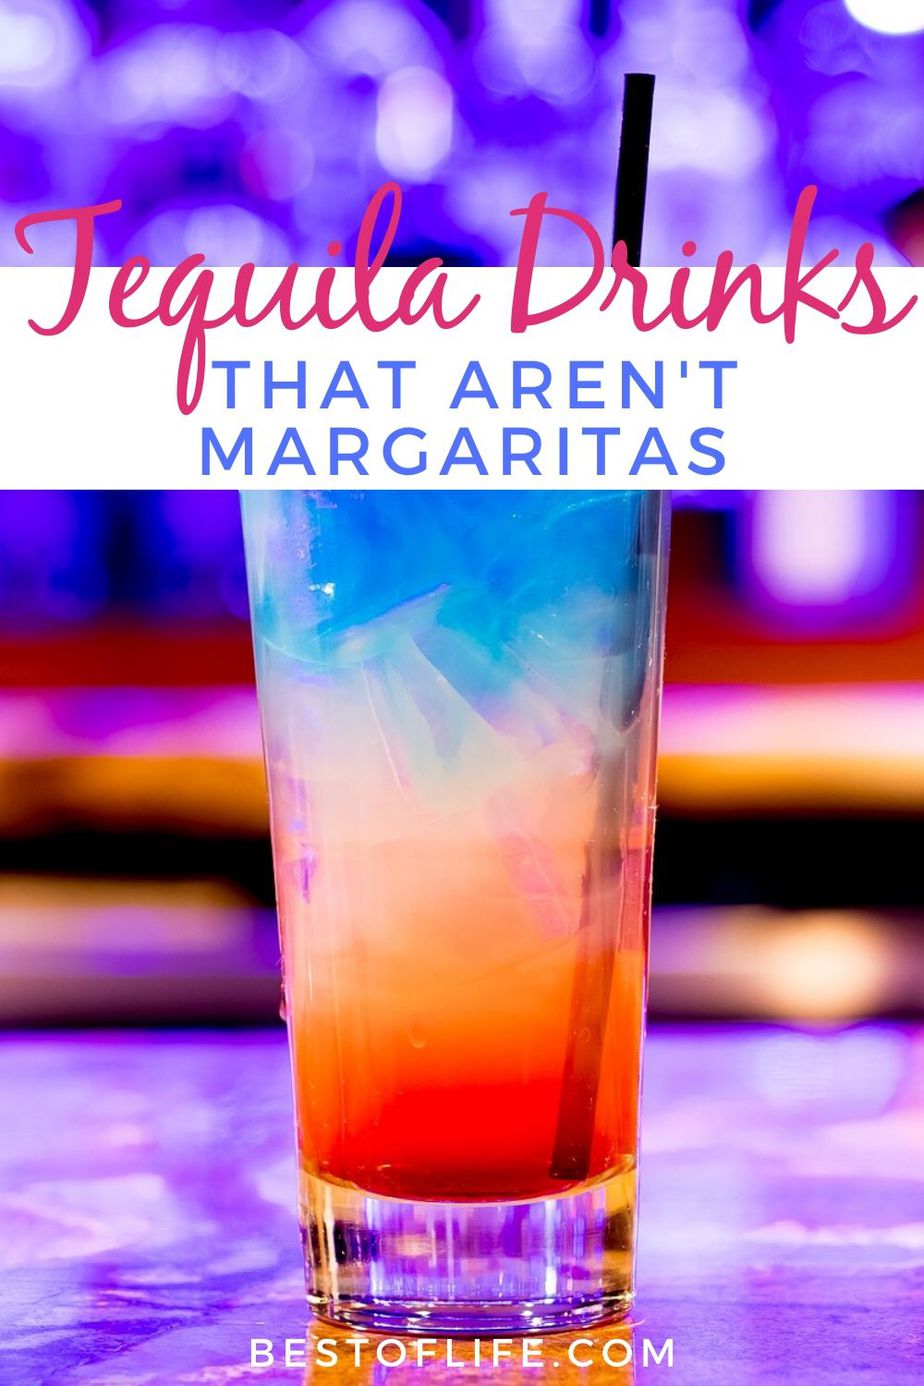 15+ Tequila Drinks that Aren't Margaritas - The Best of Life